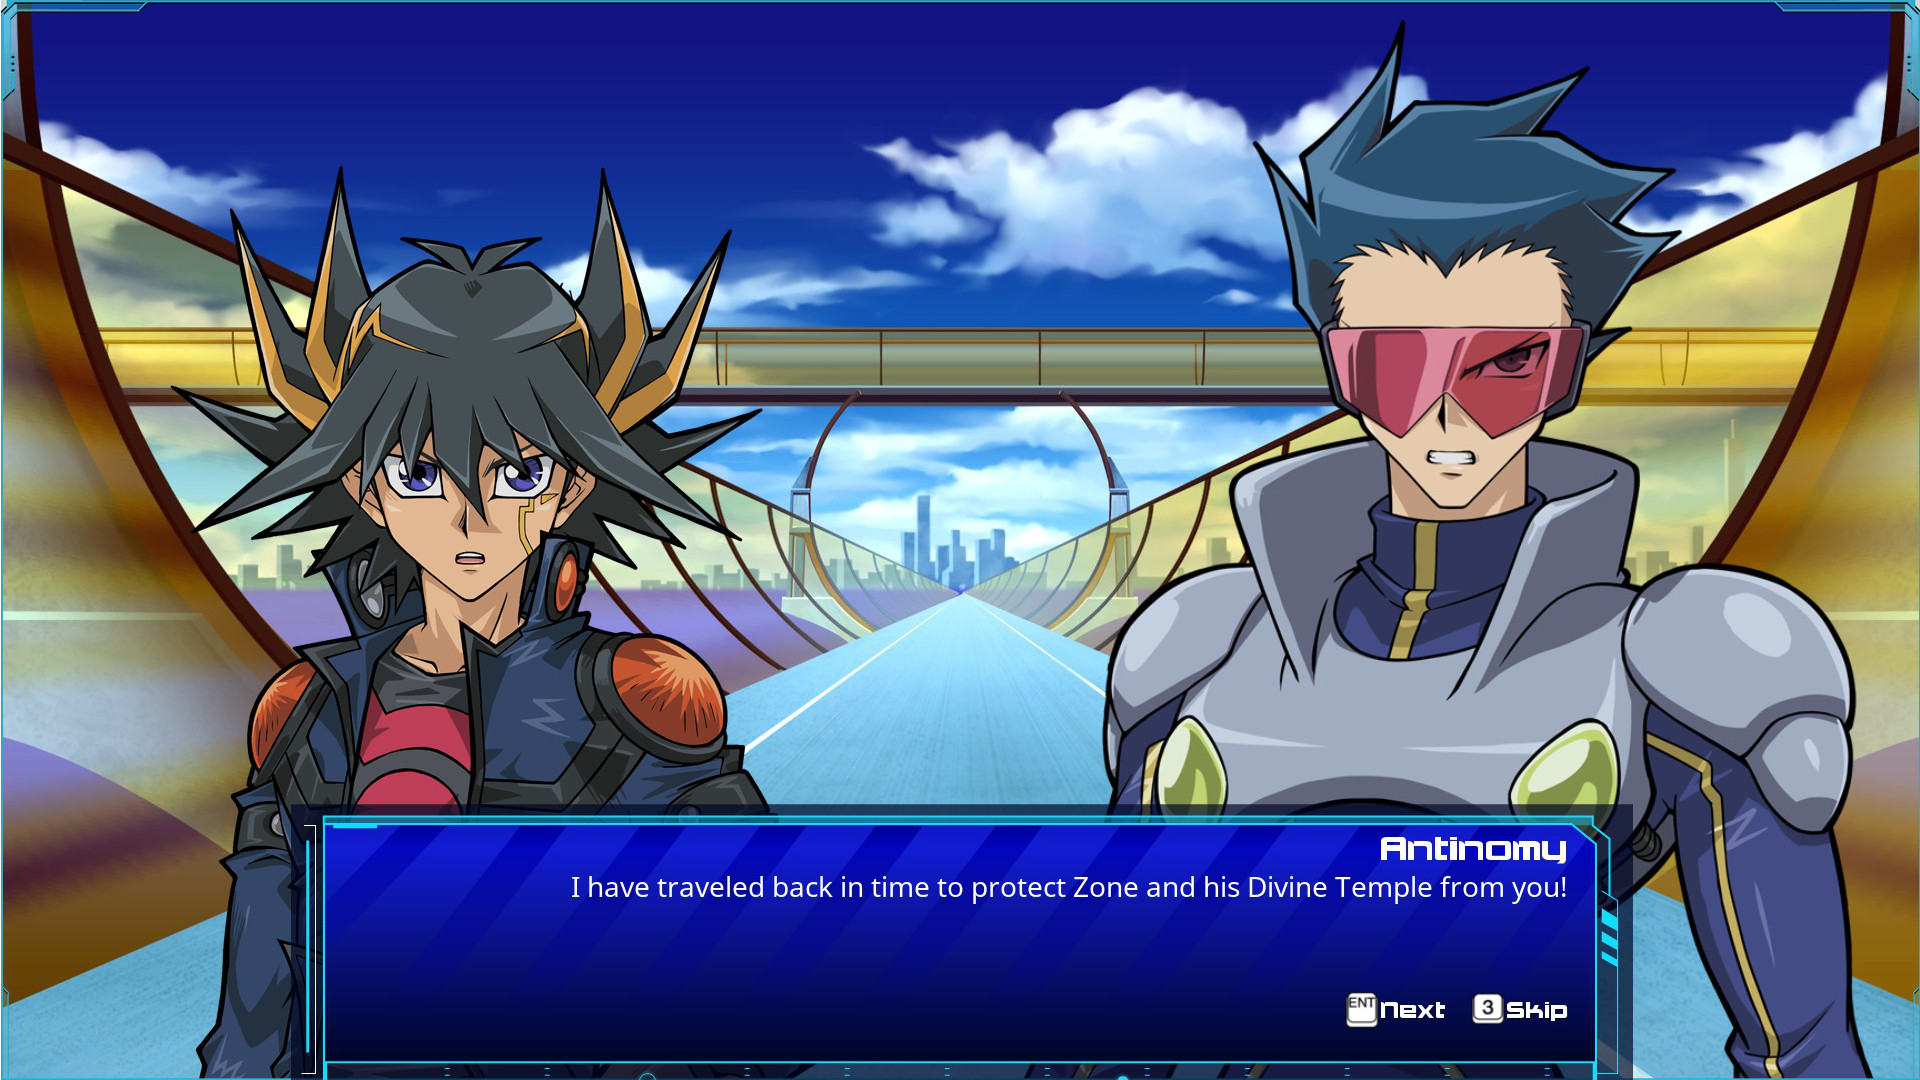 Yu-Gi-Oh! - 5D’s For the Future DLC Steam CD Key, 1.04 usd